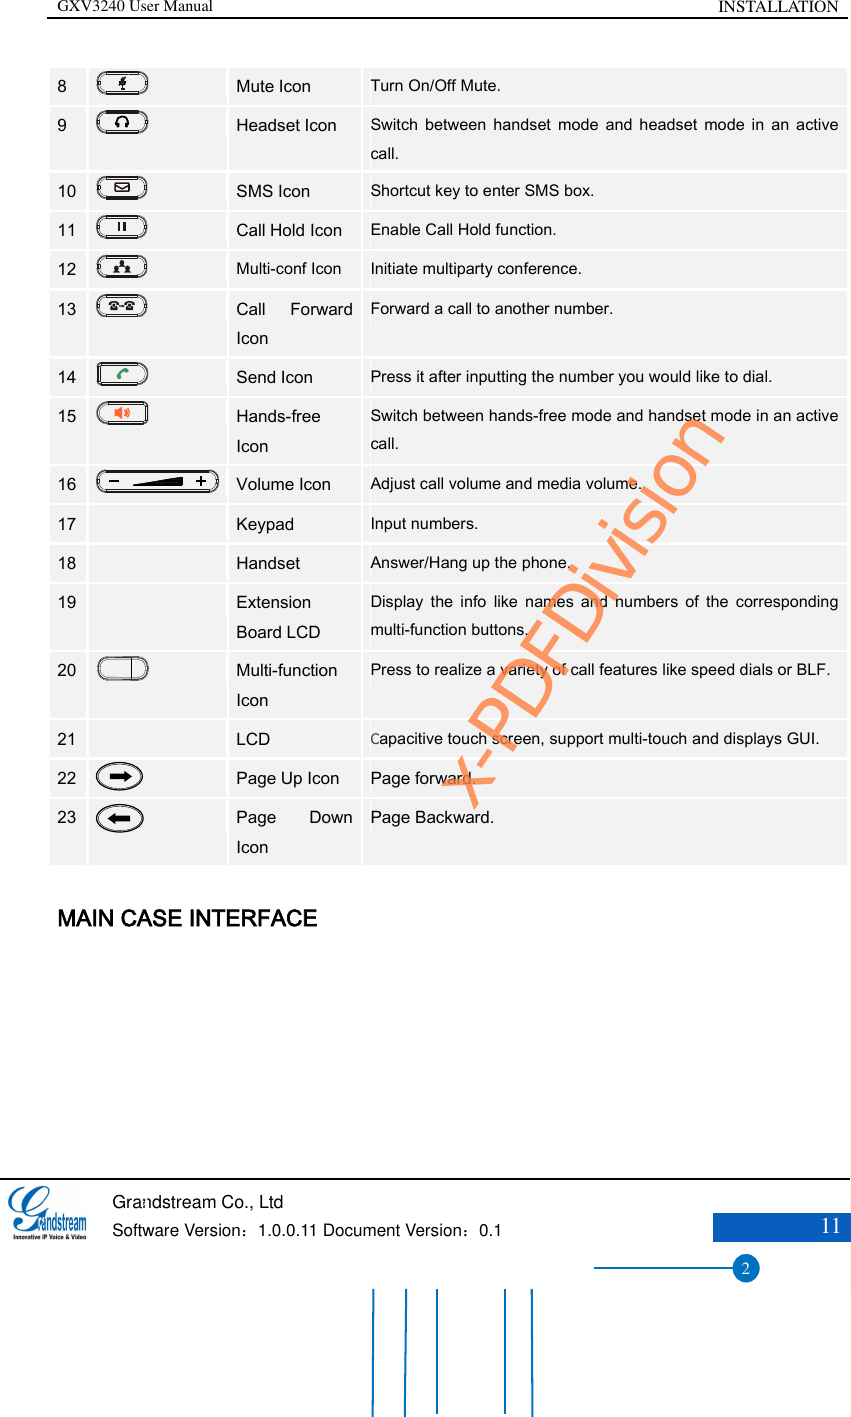 GXV3240 User Manual INSTALLATION   Grandstream Co., Ltd  Software Version：1.0.0.11 Document Version：0.1 11  8   Mute Icon Turn On/Off Mute. 9   Headset Icon Switch  between  handset  mode  and  headset  mode  in  an  active call. 10   SMS Icon Shortcut key to enter SMS box. 11   Call Hold Icon Enable Call Hold function. 12   Multi-conf Icon Initiate multiparty conference. 13   Call  Forward Icon Forward a call to another number. 14   Send Icon Press it after inputting the number you would like to dial.   15   Hands-free Icon Switch between hands-free mode and handset mode in an active call. 16   Volume Icon Adjust call volume and media volume. 17   Keypad Input numbers. 18   Handset Answer/Hang up the phone. 19   Extension Board LCD Display  the  info  like  names  and  numbers  of  the  corresponding multi-function buttons. 20   Multi-function Icon   Press to realize a variety of call features like speed dials or BLF. 21   LCD   Capacitive touch screen, support multi-touch and displays GUI. 22   Page Up Icon   Page forward. 23   Page  Down   Icon Page Backward. MAIN CASE INTERFACE     2 9 x-PDFDivision